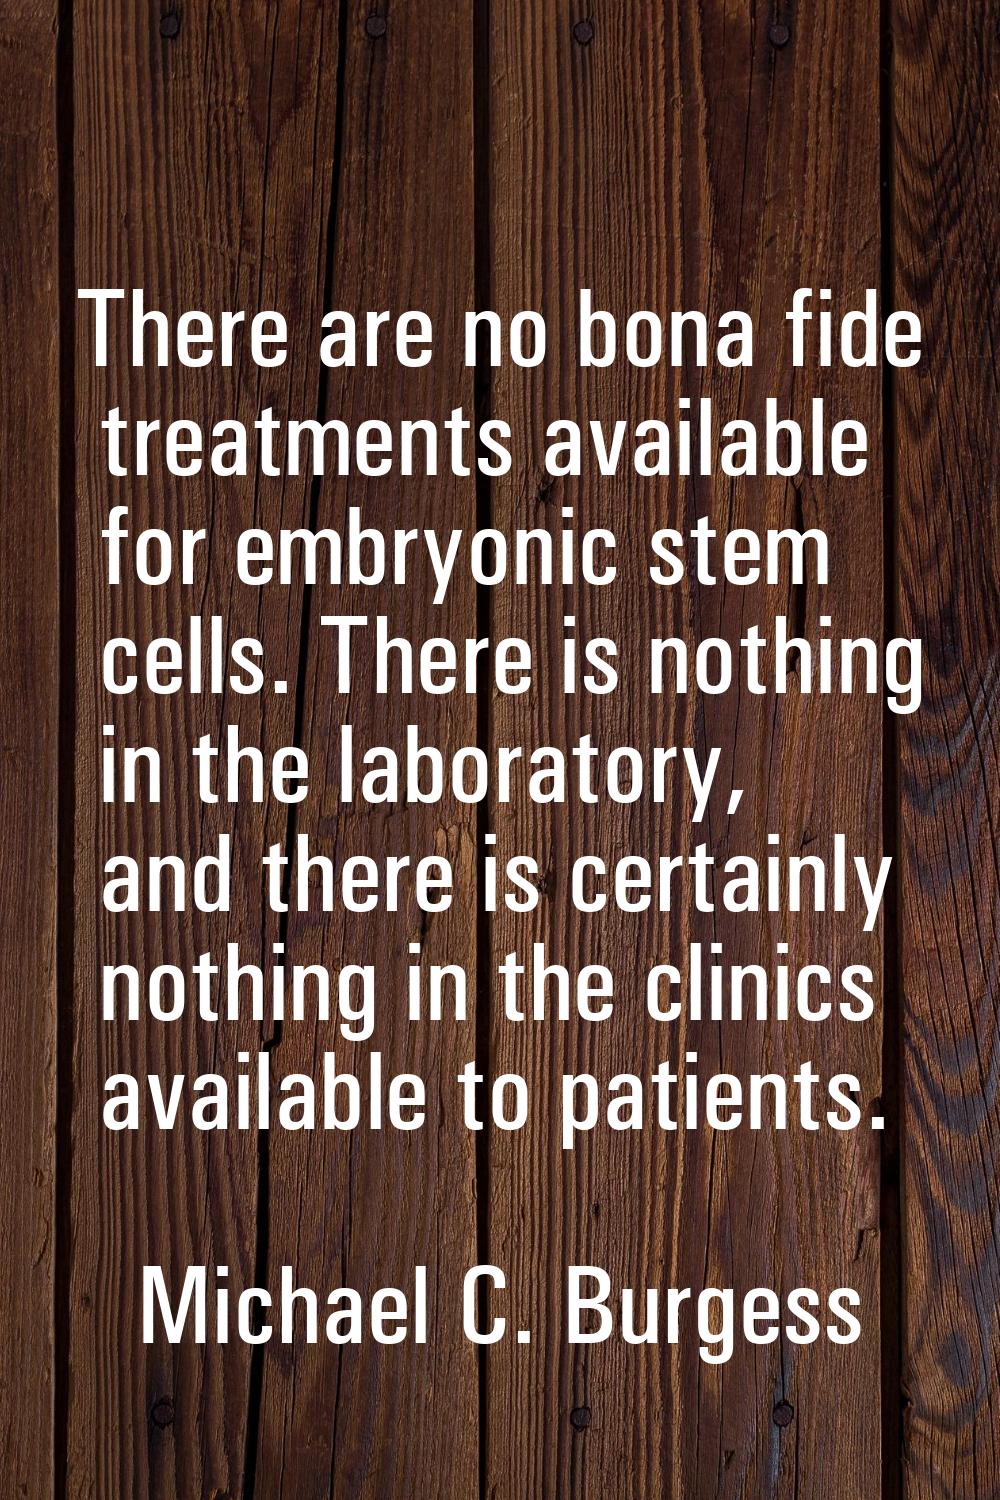 There are no bona fide treatments available for embryonic stem cells. There is nothing in the labor